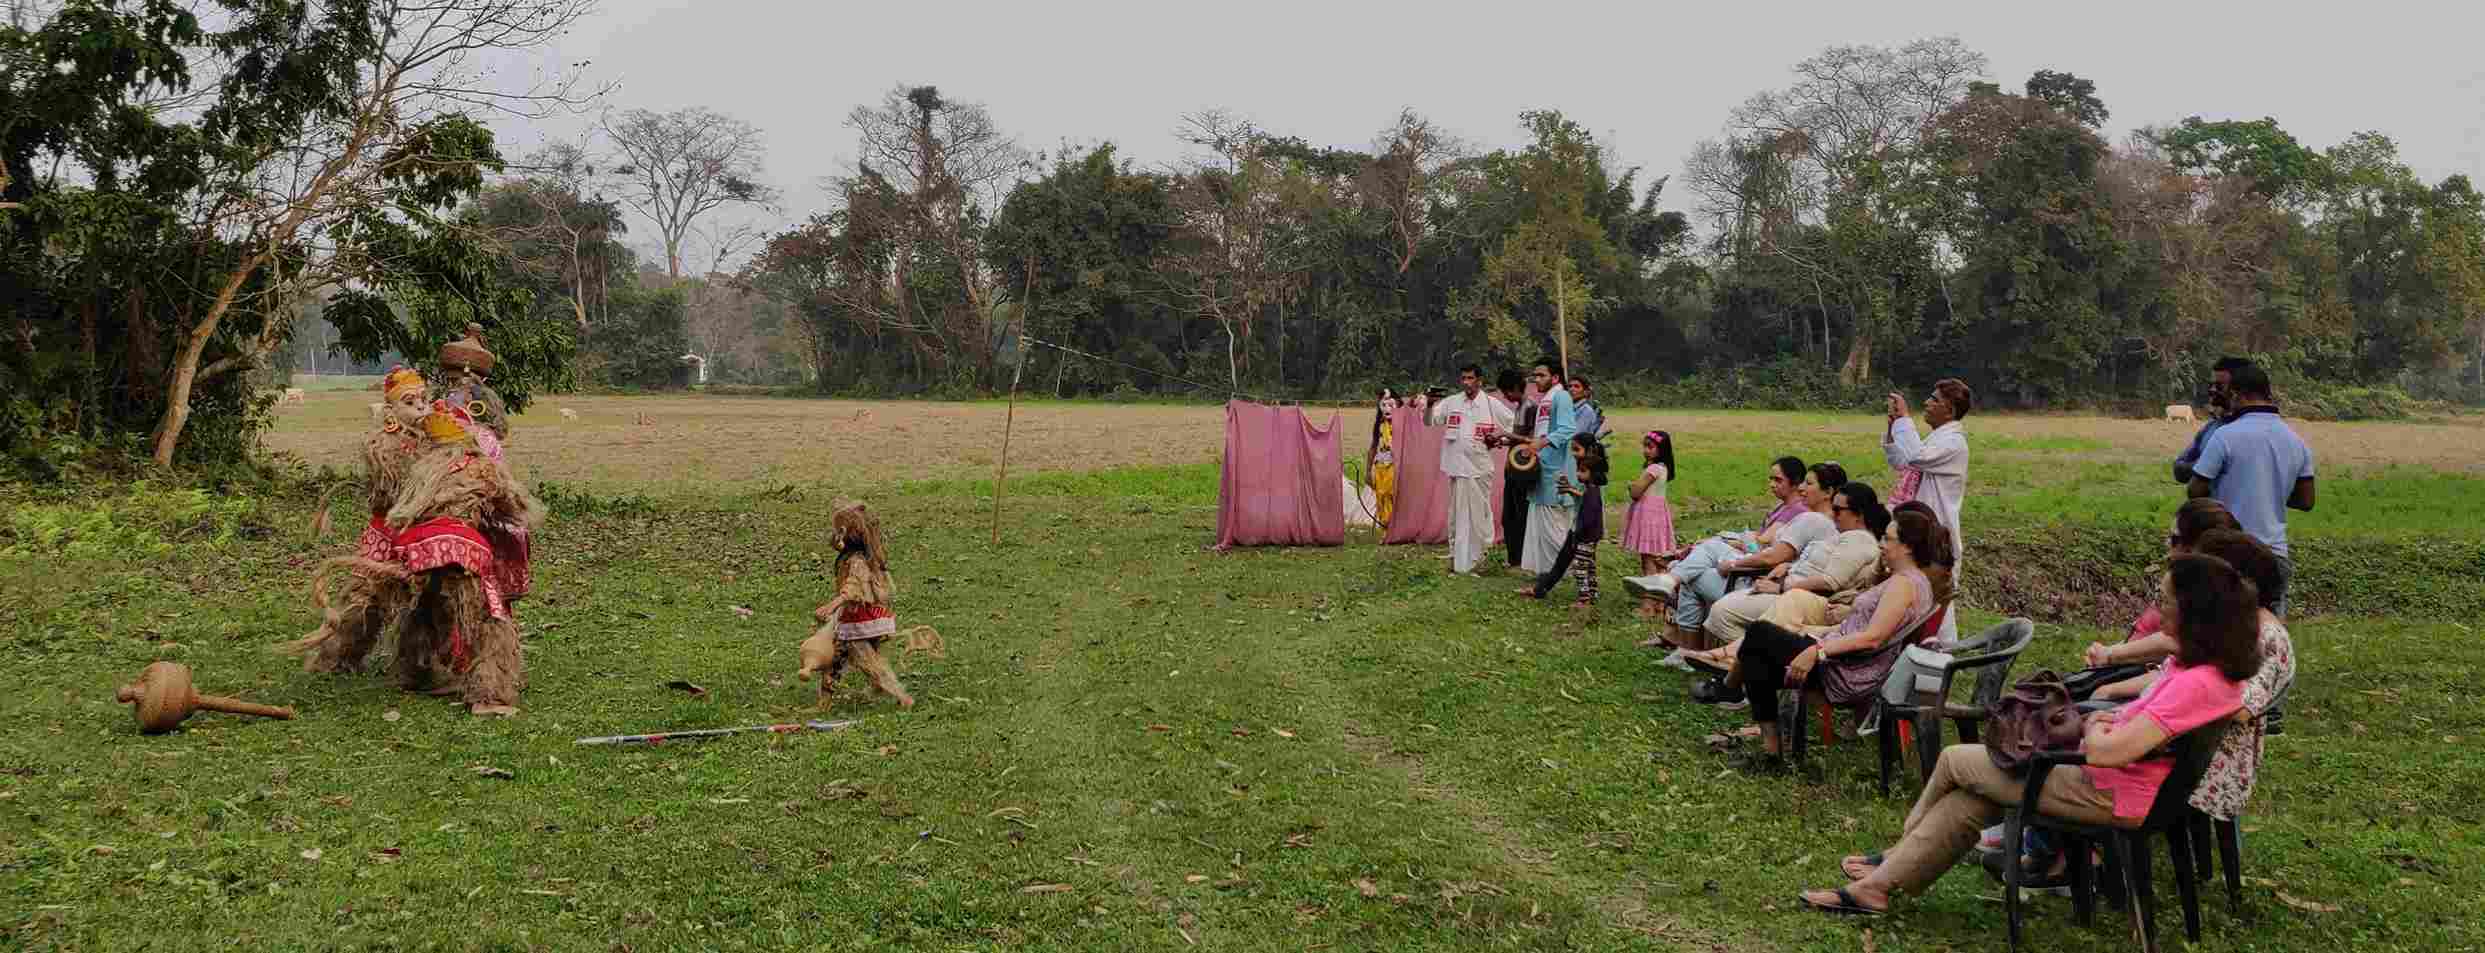 Guests watching a performance at Majuli, a town in Assam